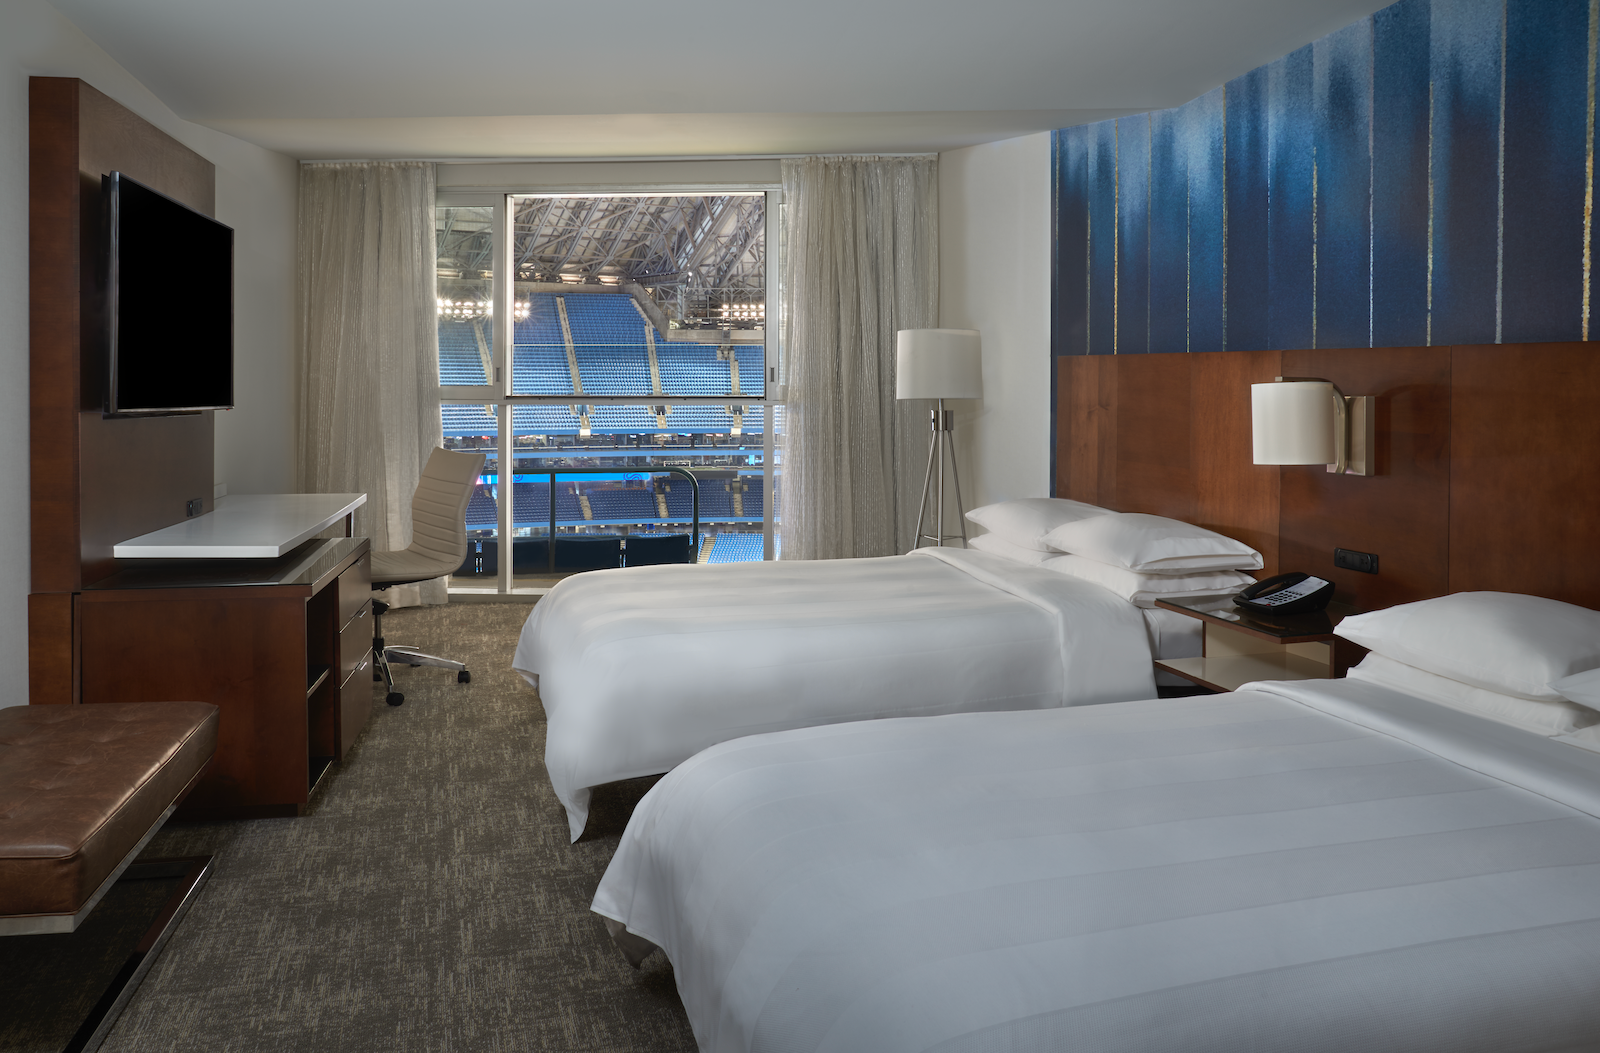 Bird's eye view of Blue Jays from comfort of in-stadium hotel